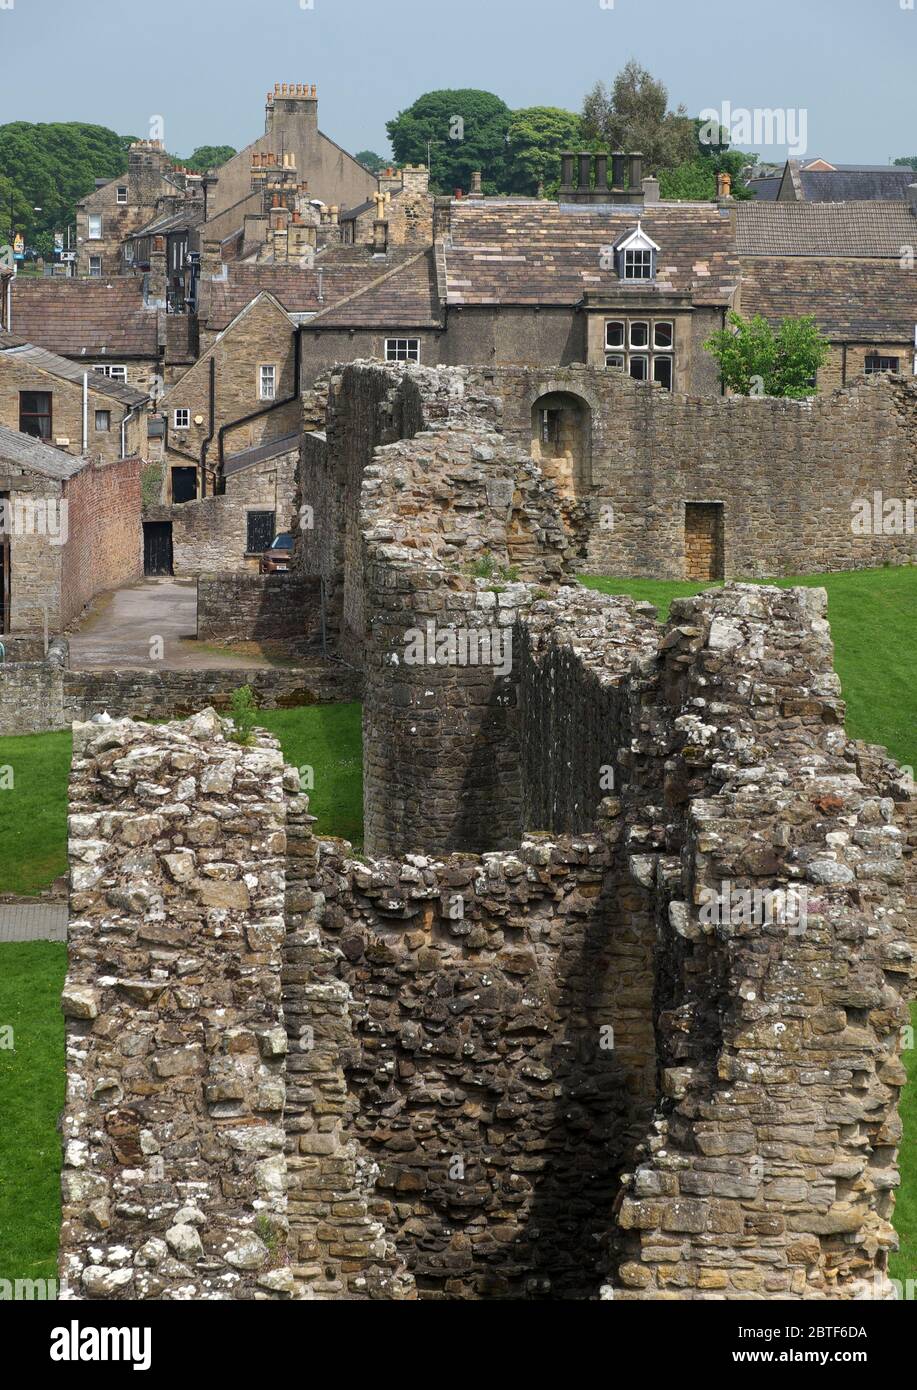 Looking out over the rooftops of Barnard Castle in County Durham, from the market town's medieval fortress Stock Photo